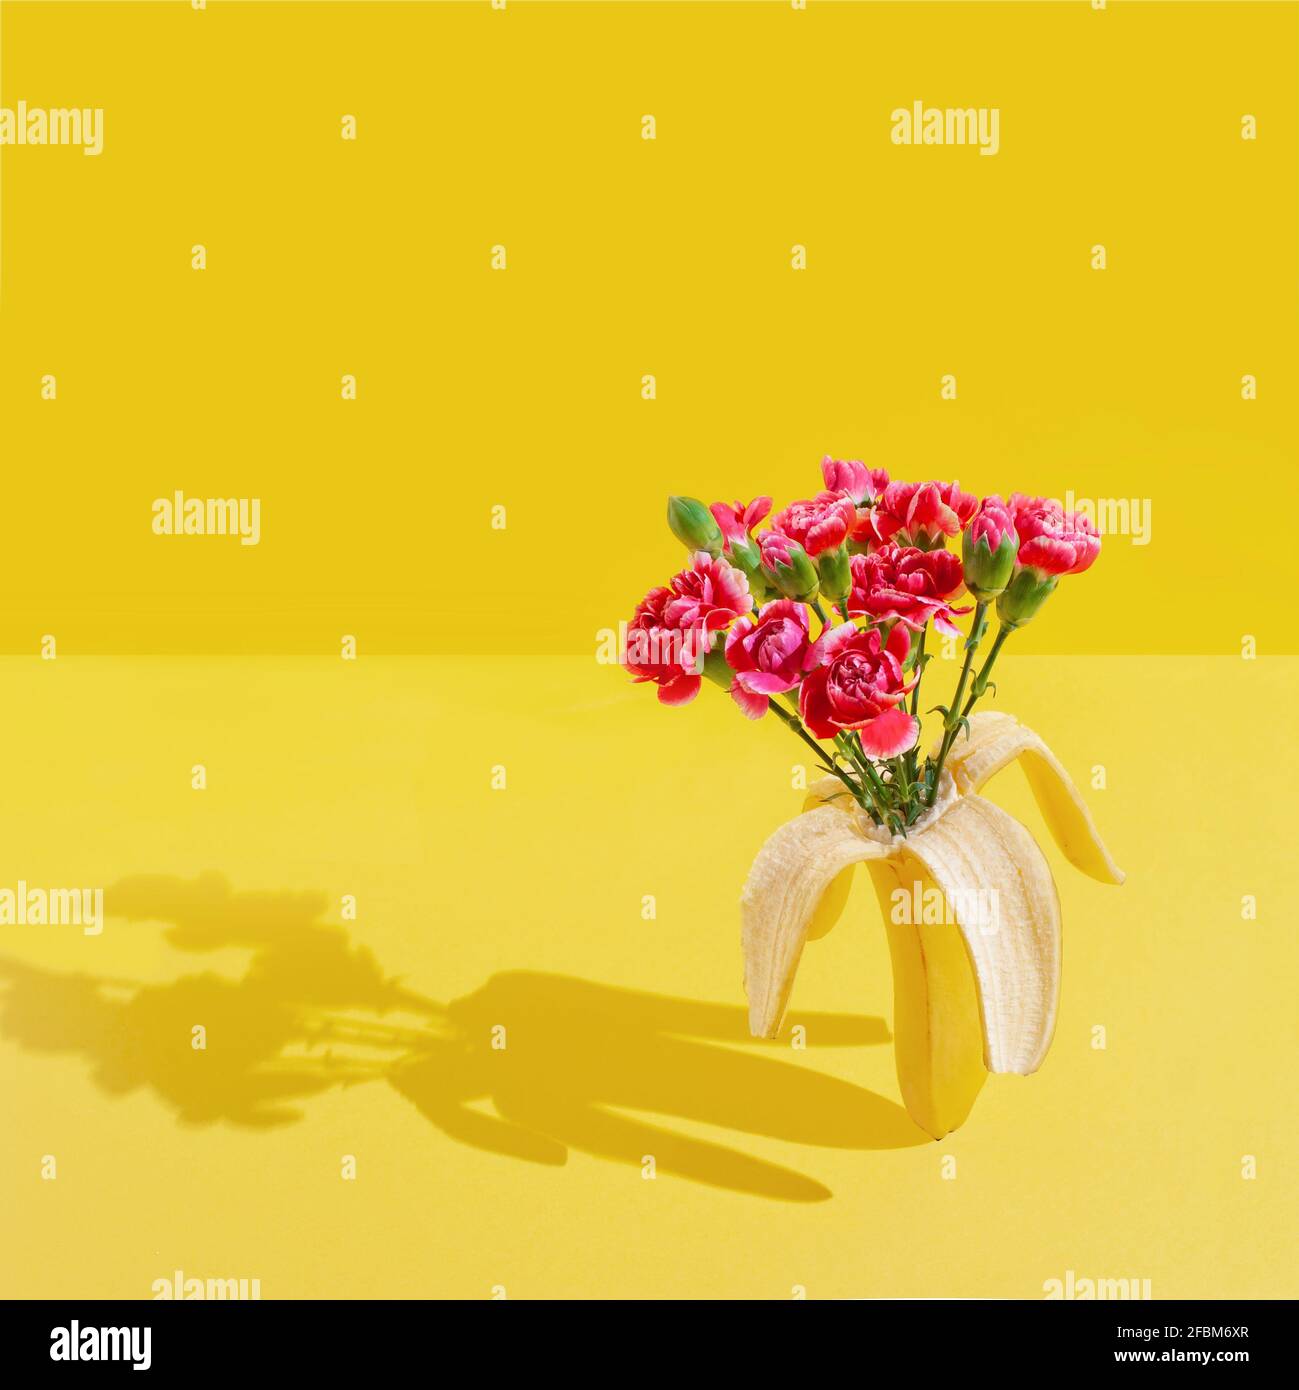 Summer concept made with fresh banana fruit and red flowers over bright yellow background. Minimal sunlight summer concept with exclusive banana . Stock Photo